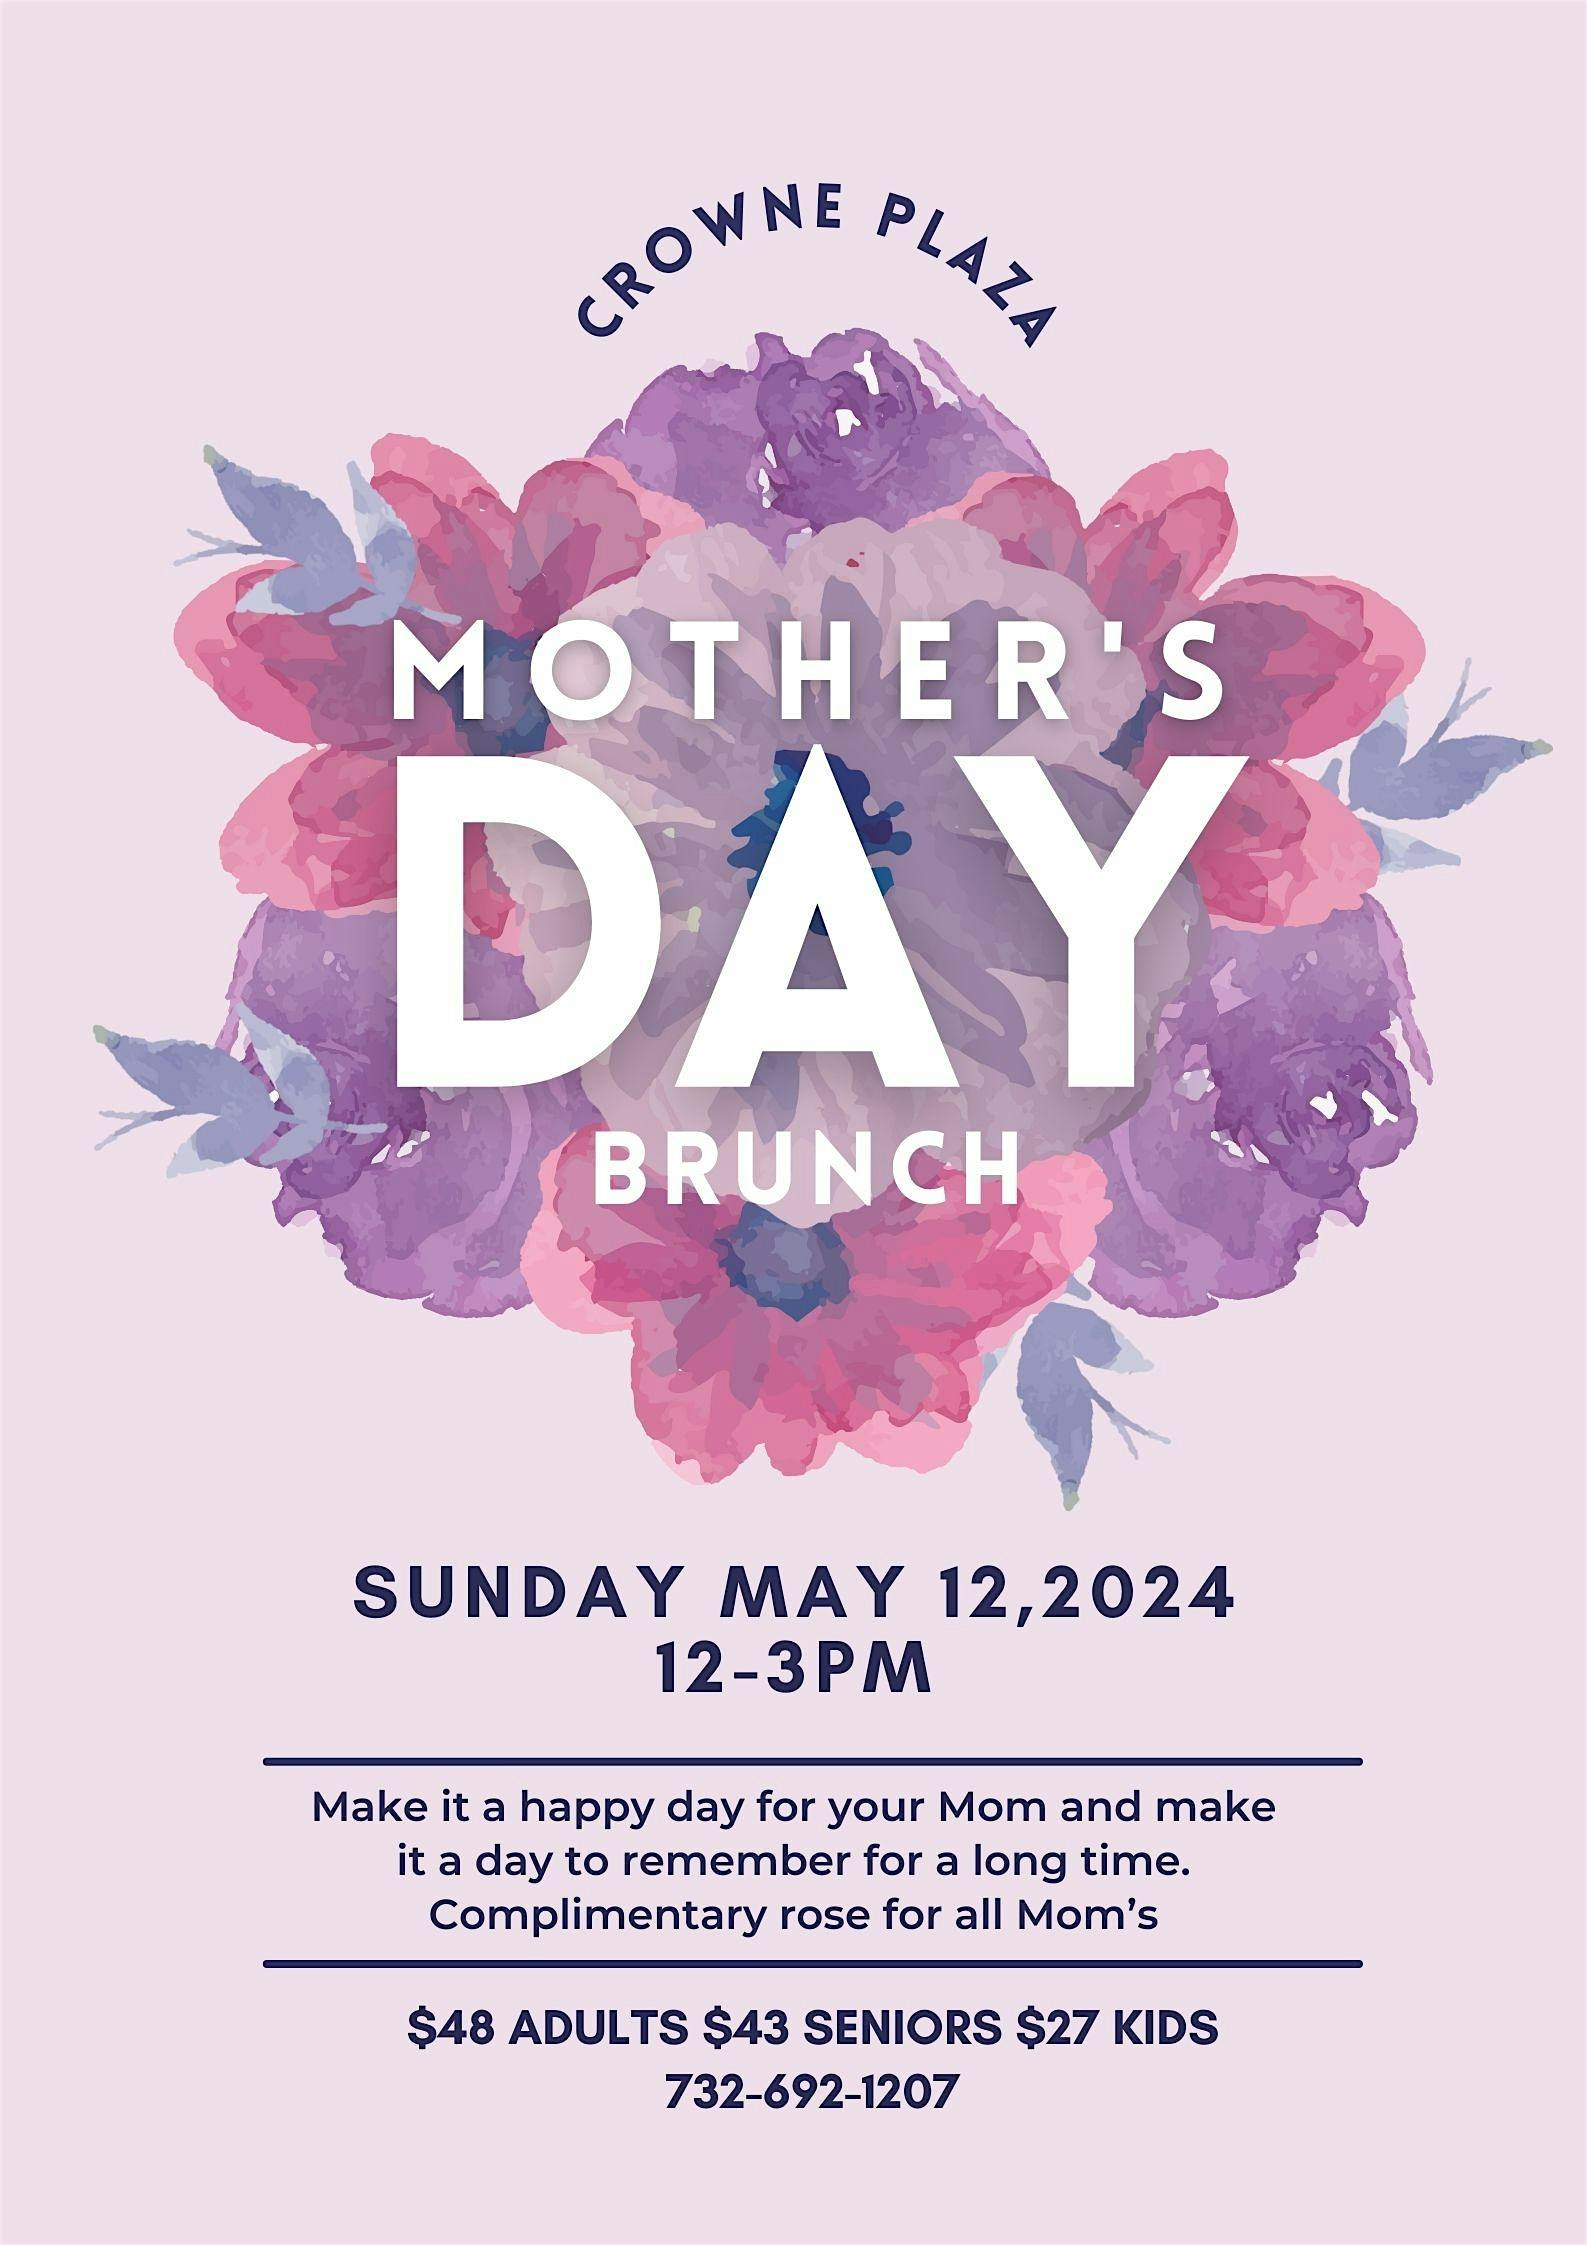 Mothers Day Brunch at the Newly Renovated Crowne Plaza Edison